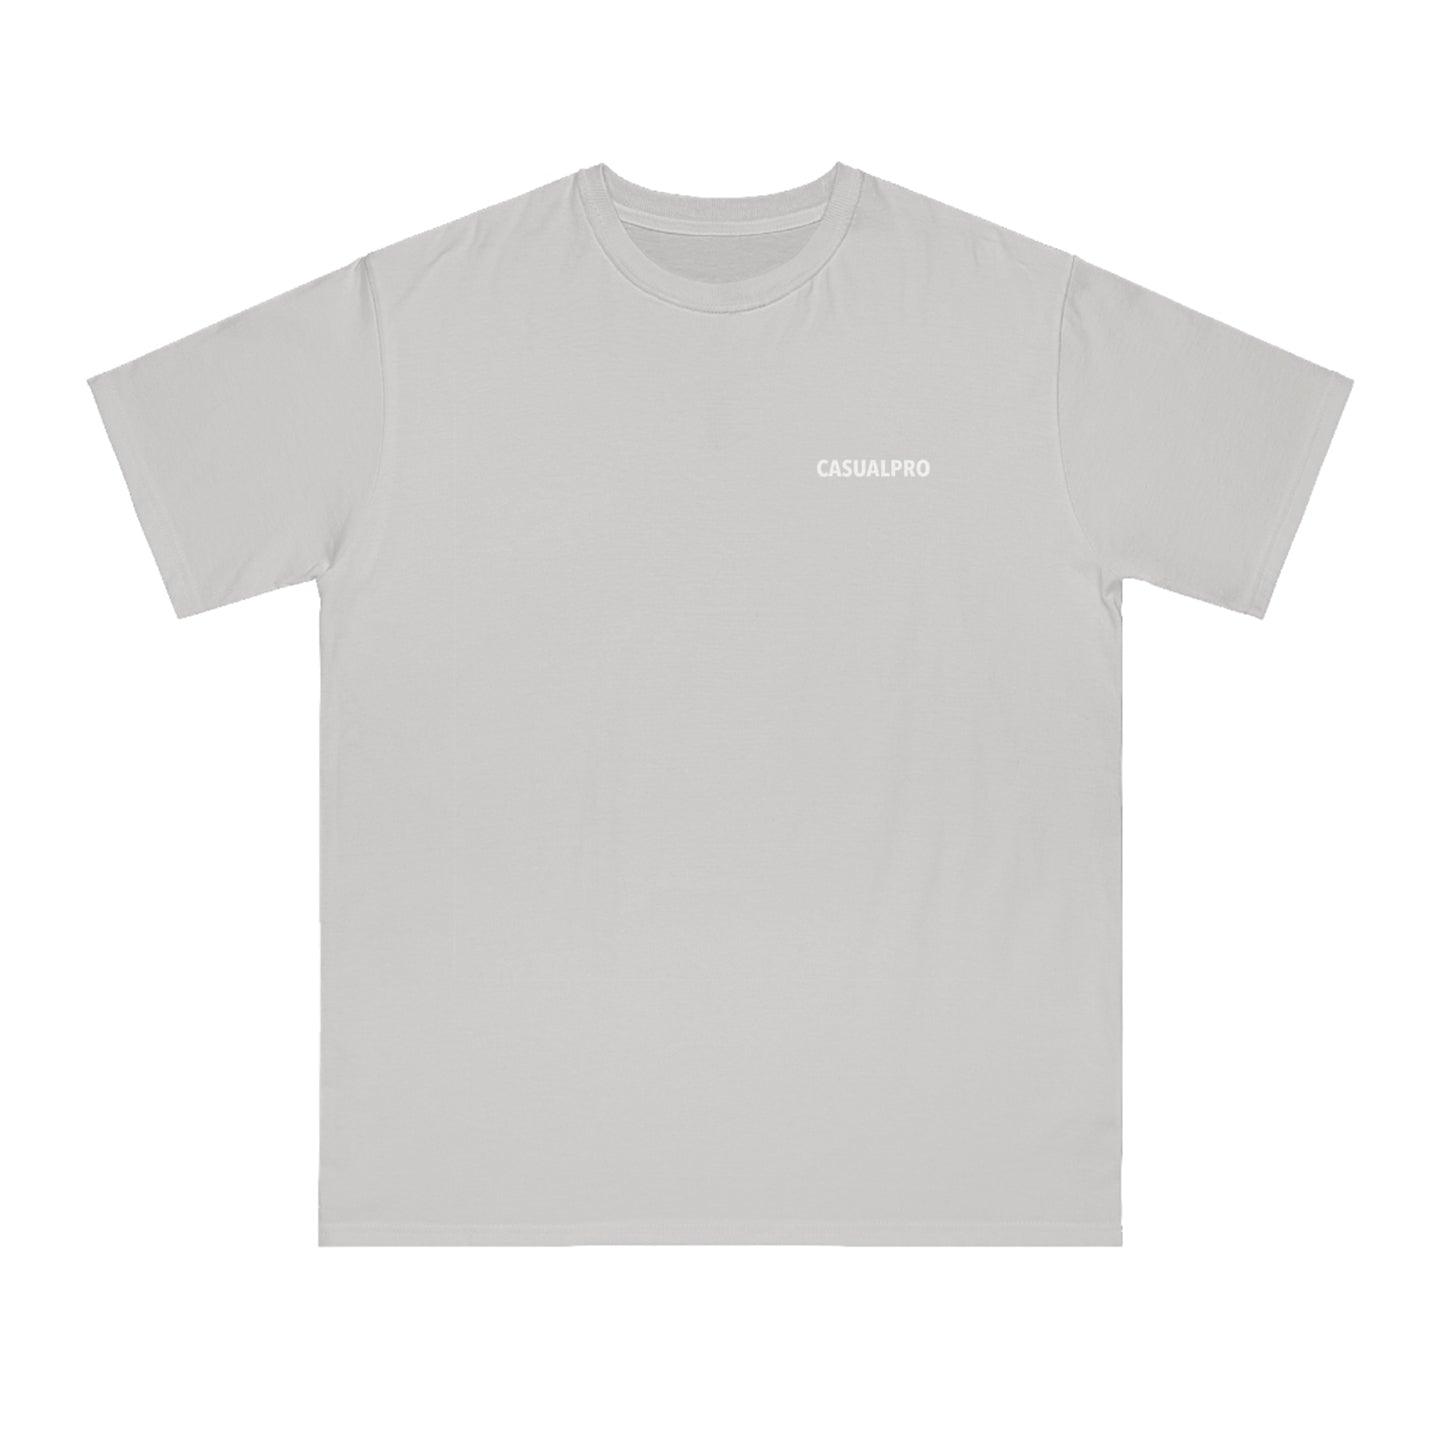 ENTHUSIASTS T-SHIRT - CasualPro